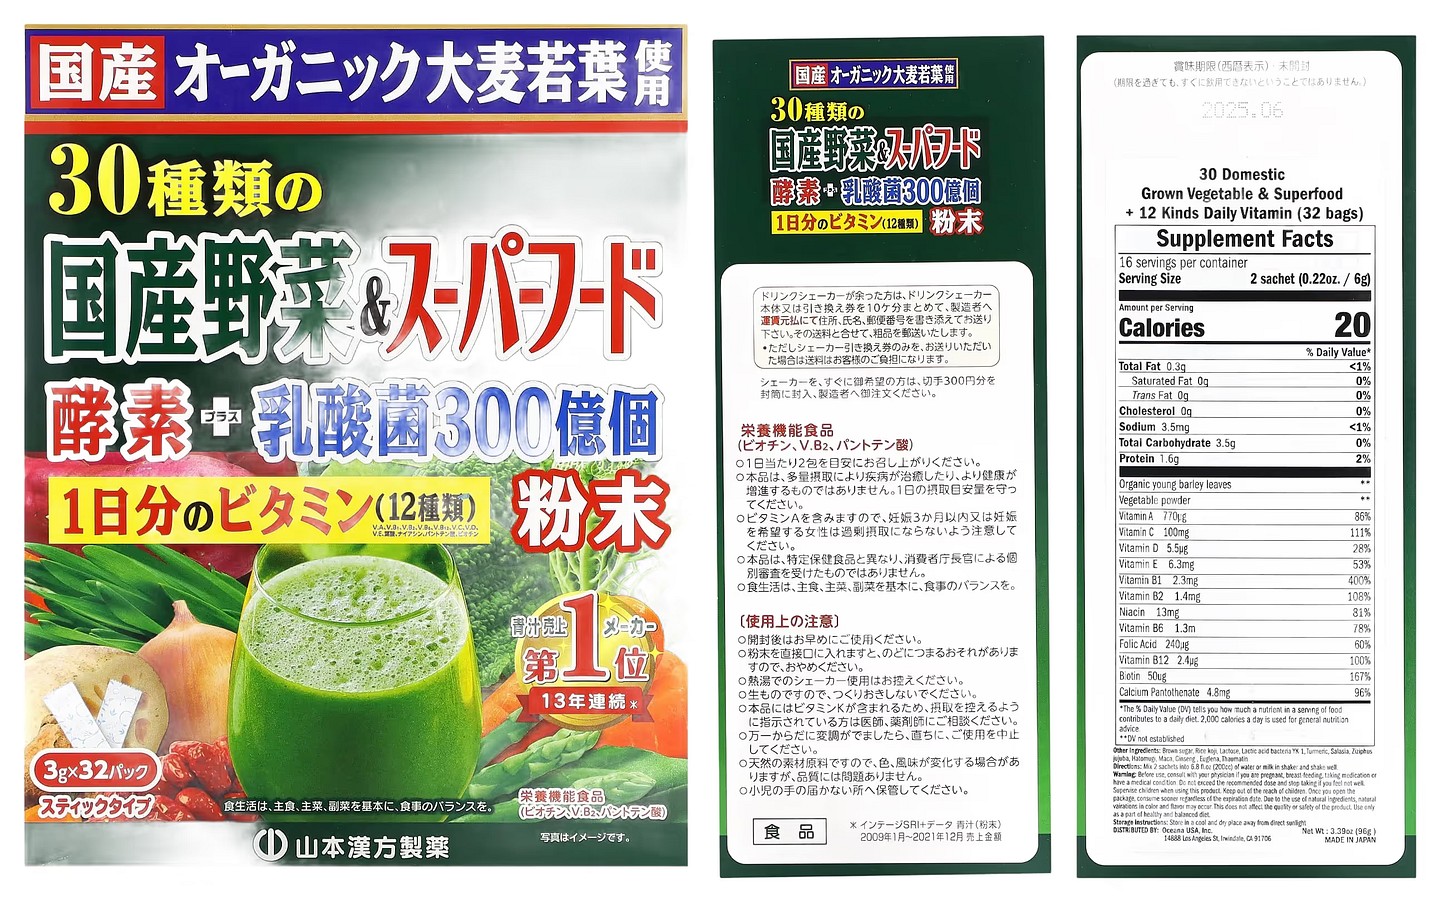 Yamamoto Kanpoh, 30 Domestic Grown Vegetable & Superfood + 12 Kinds Daily Vitamin packaging